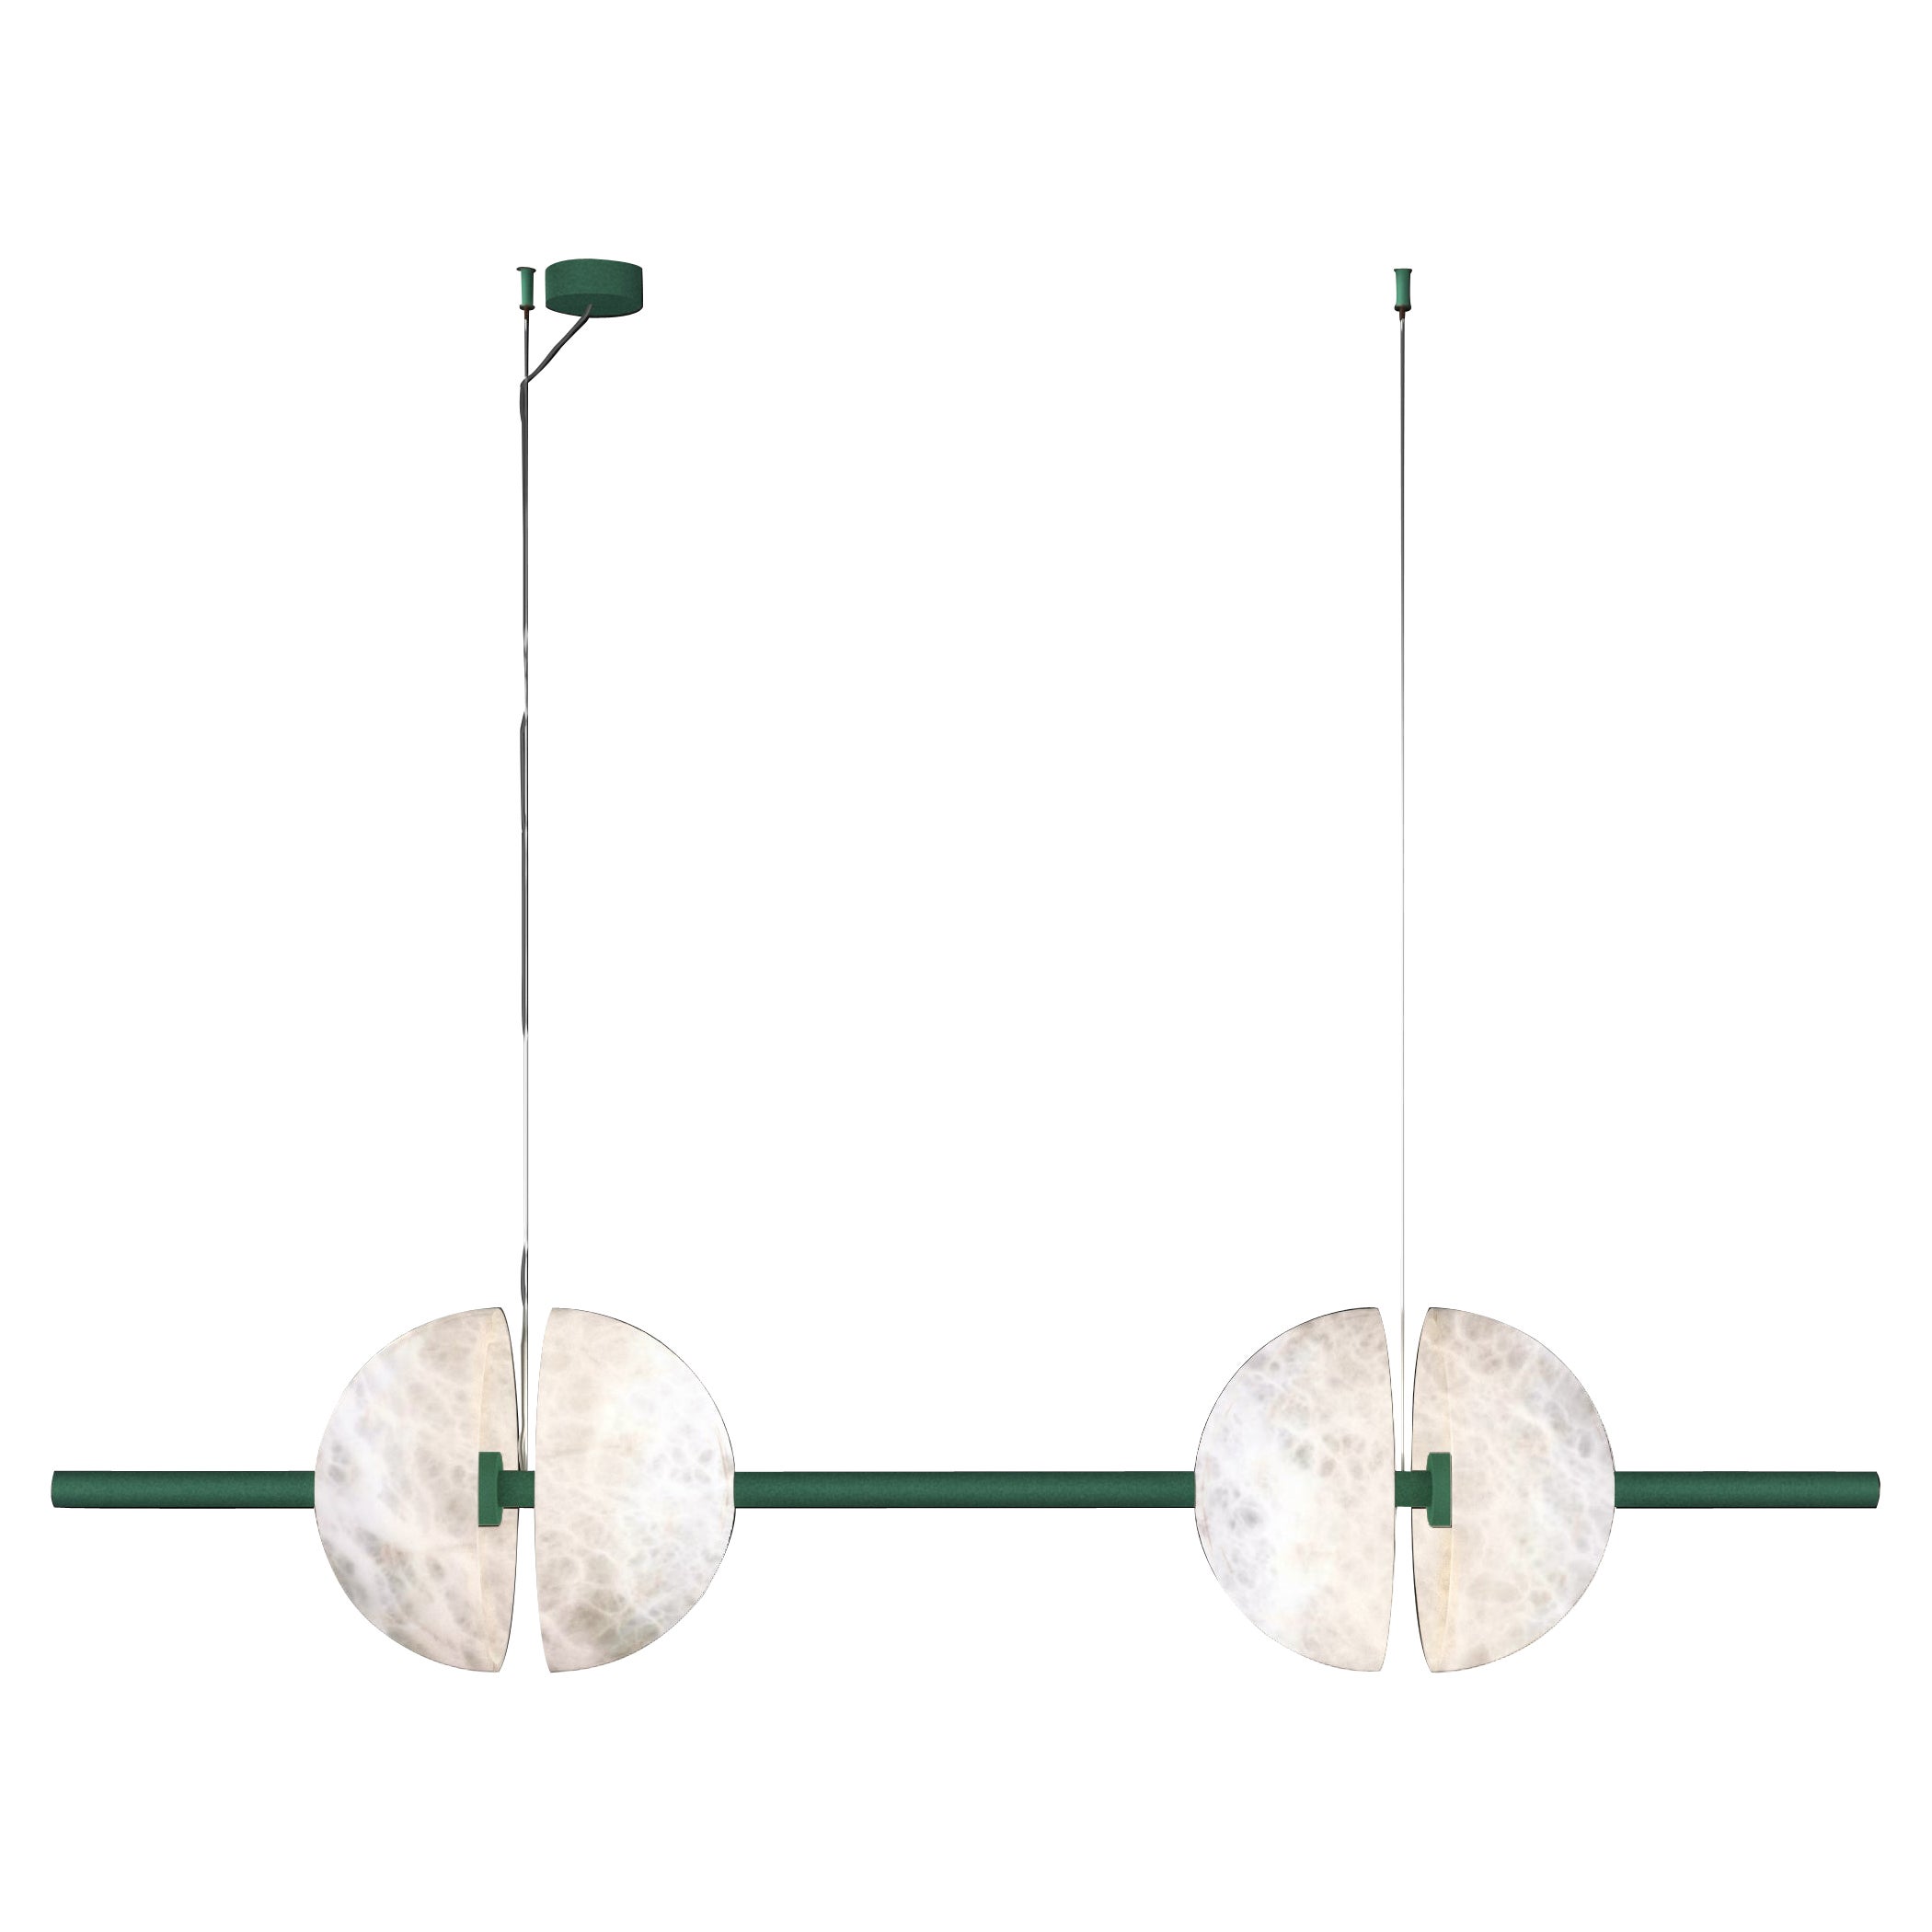 Ermes Freedom Green Metal And Alabaster Pendant Light 1 by Alabastro Italiano